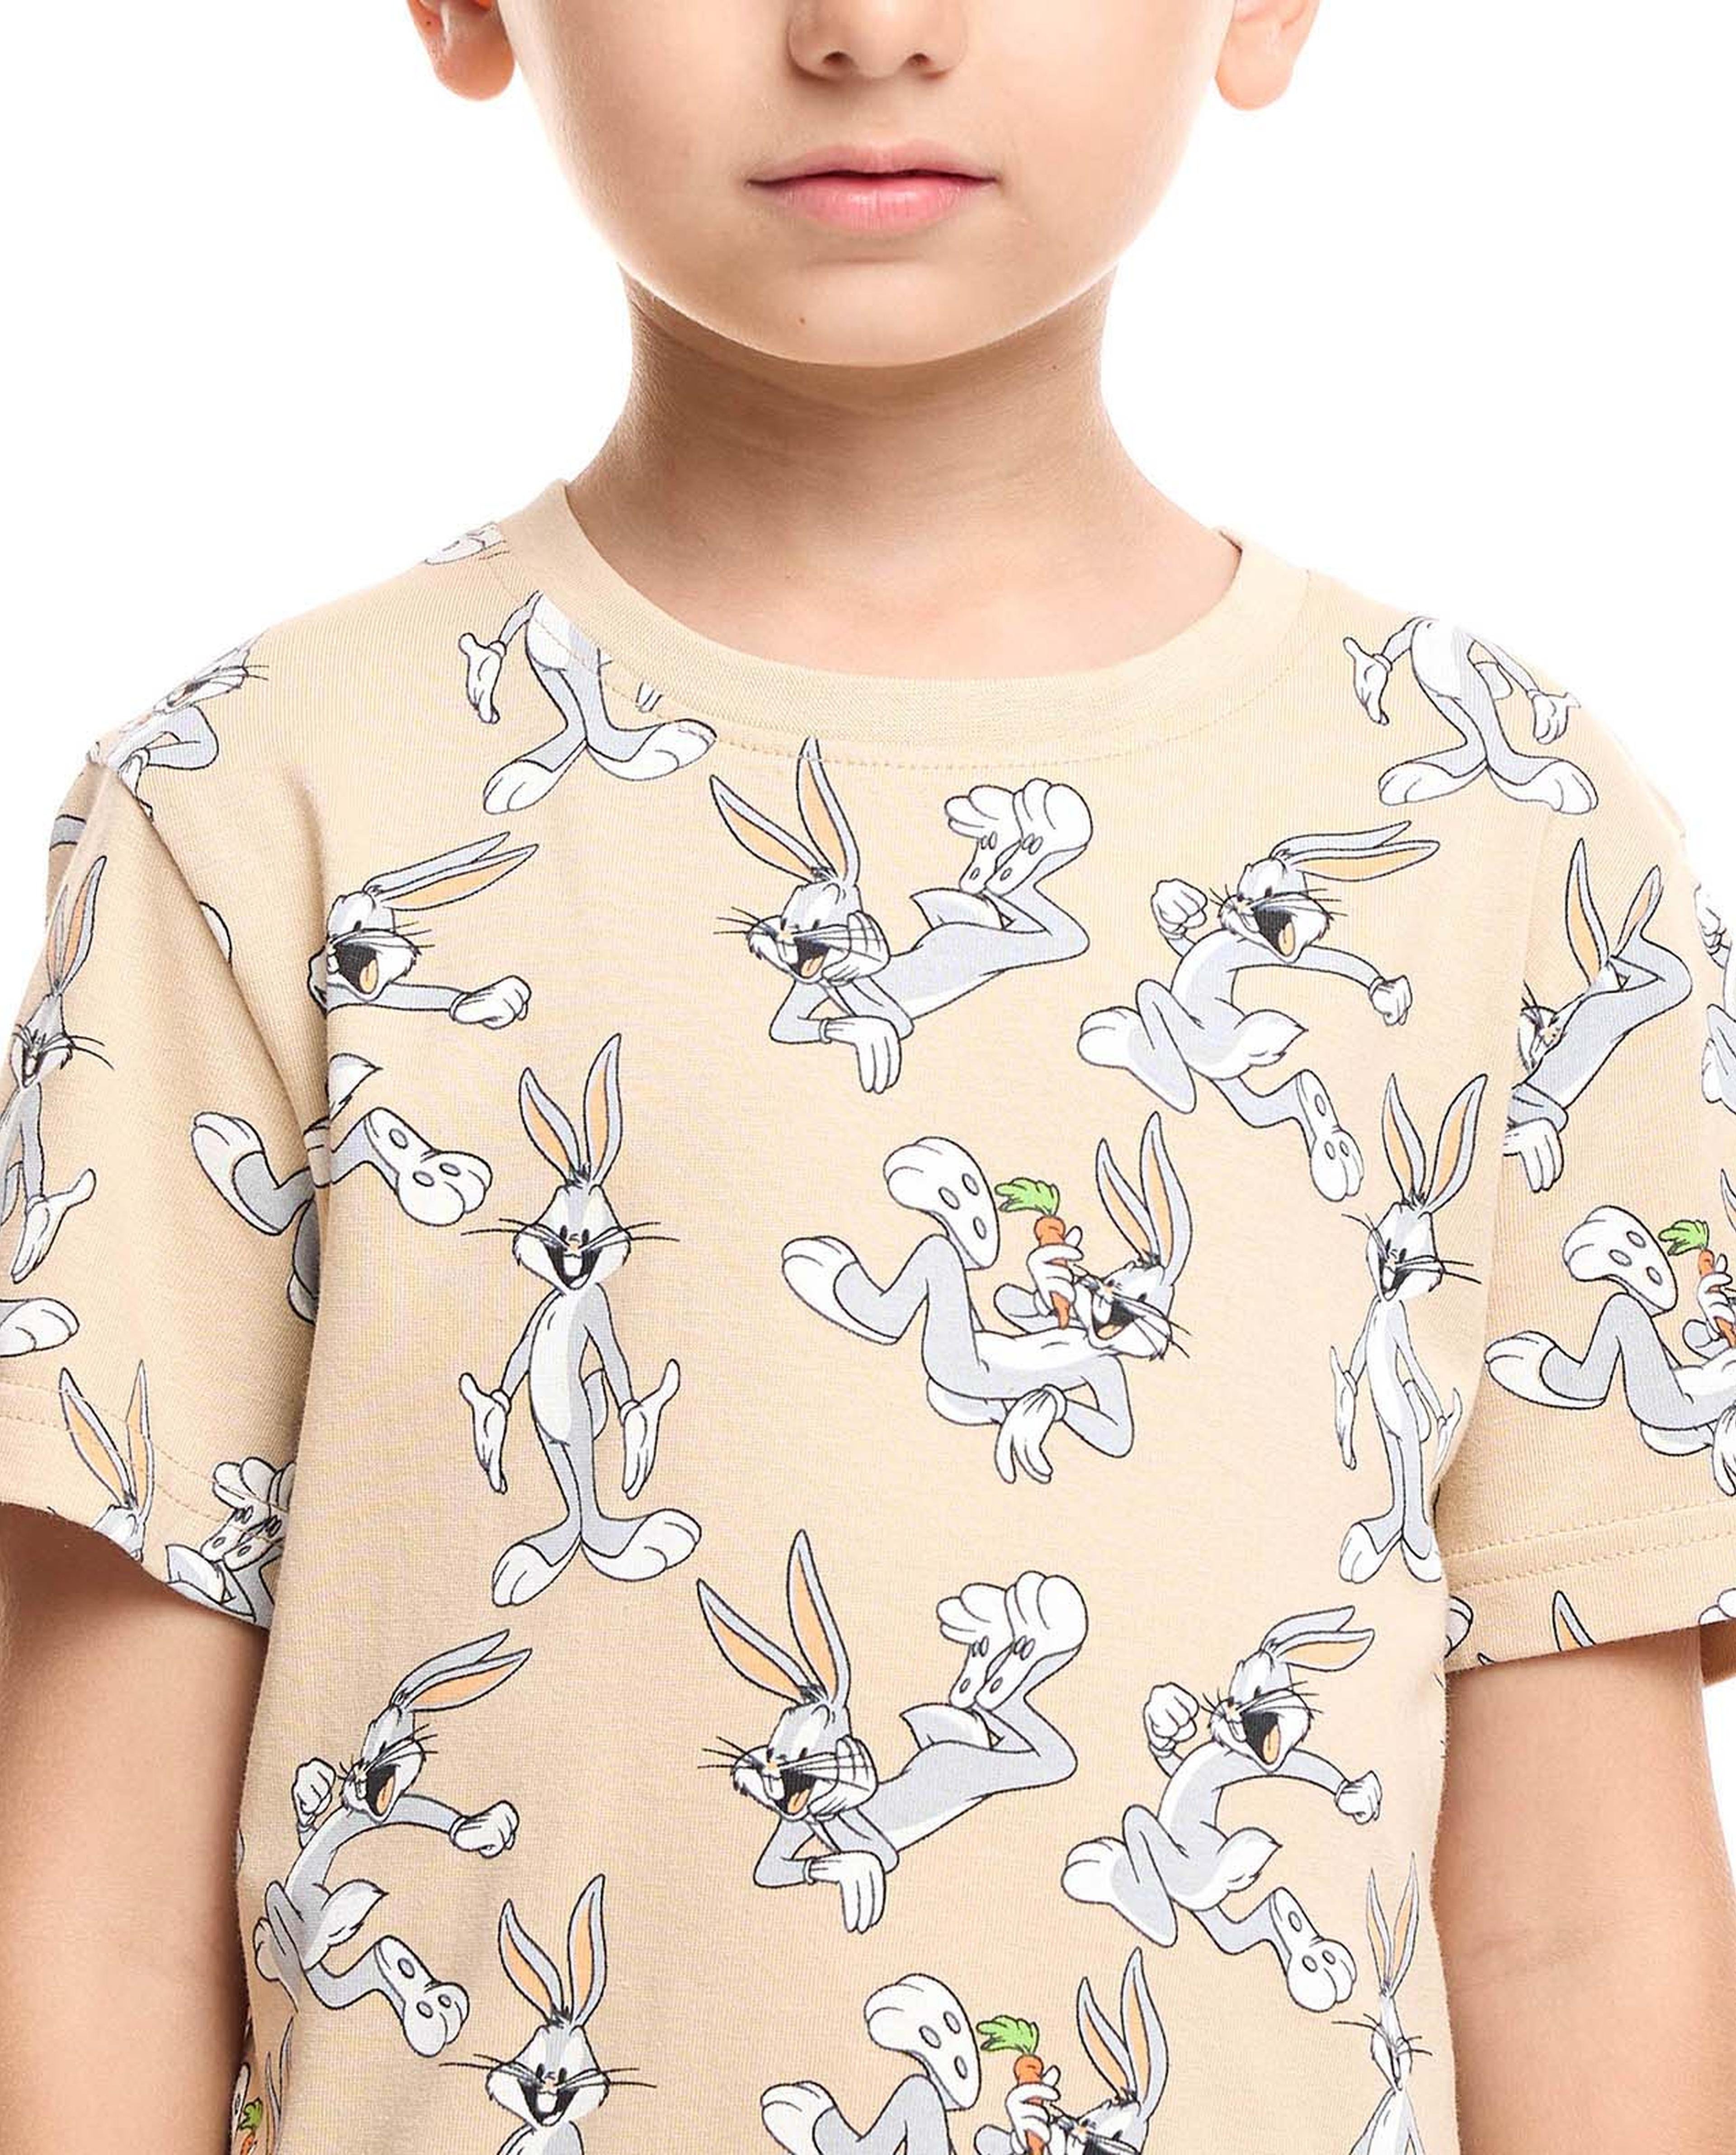 2 Pack Looney Tunes Print T-Shirts with Crew Neck and Short Sleeves